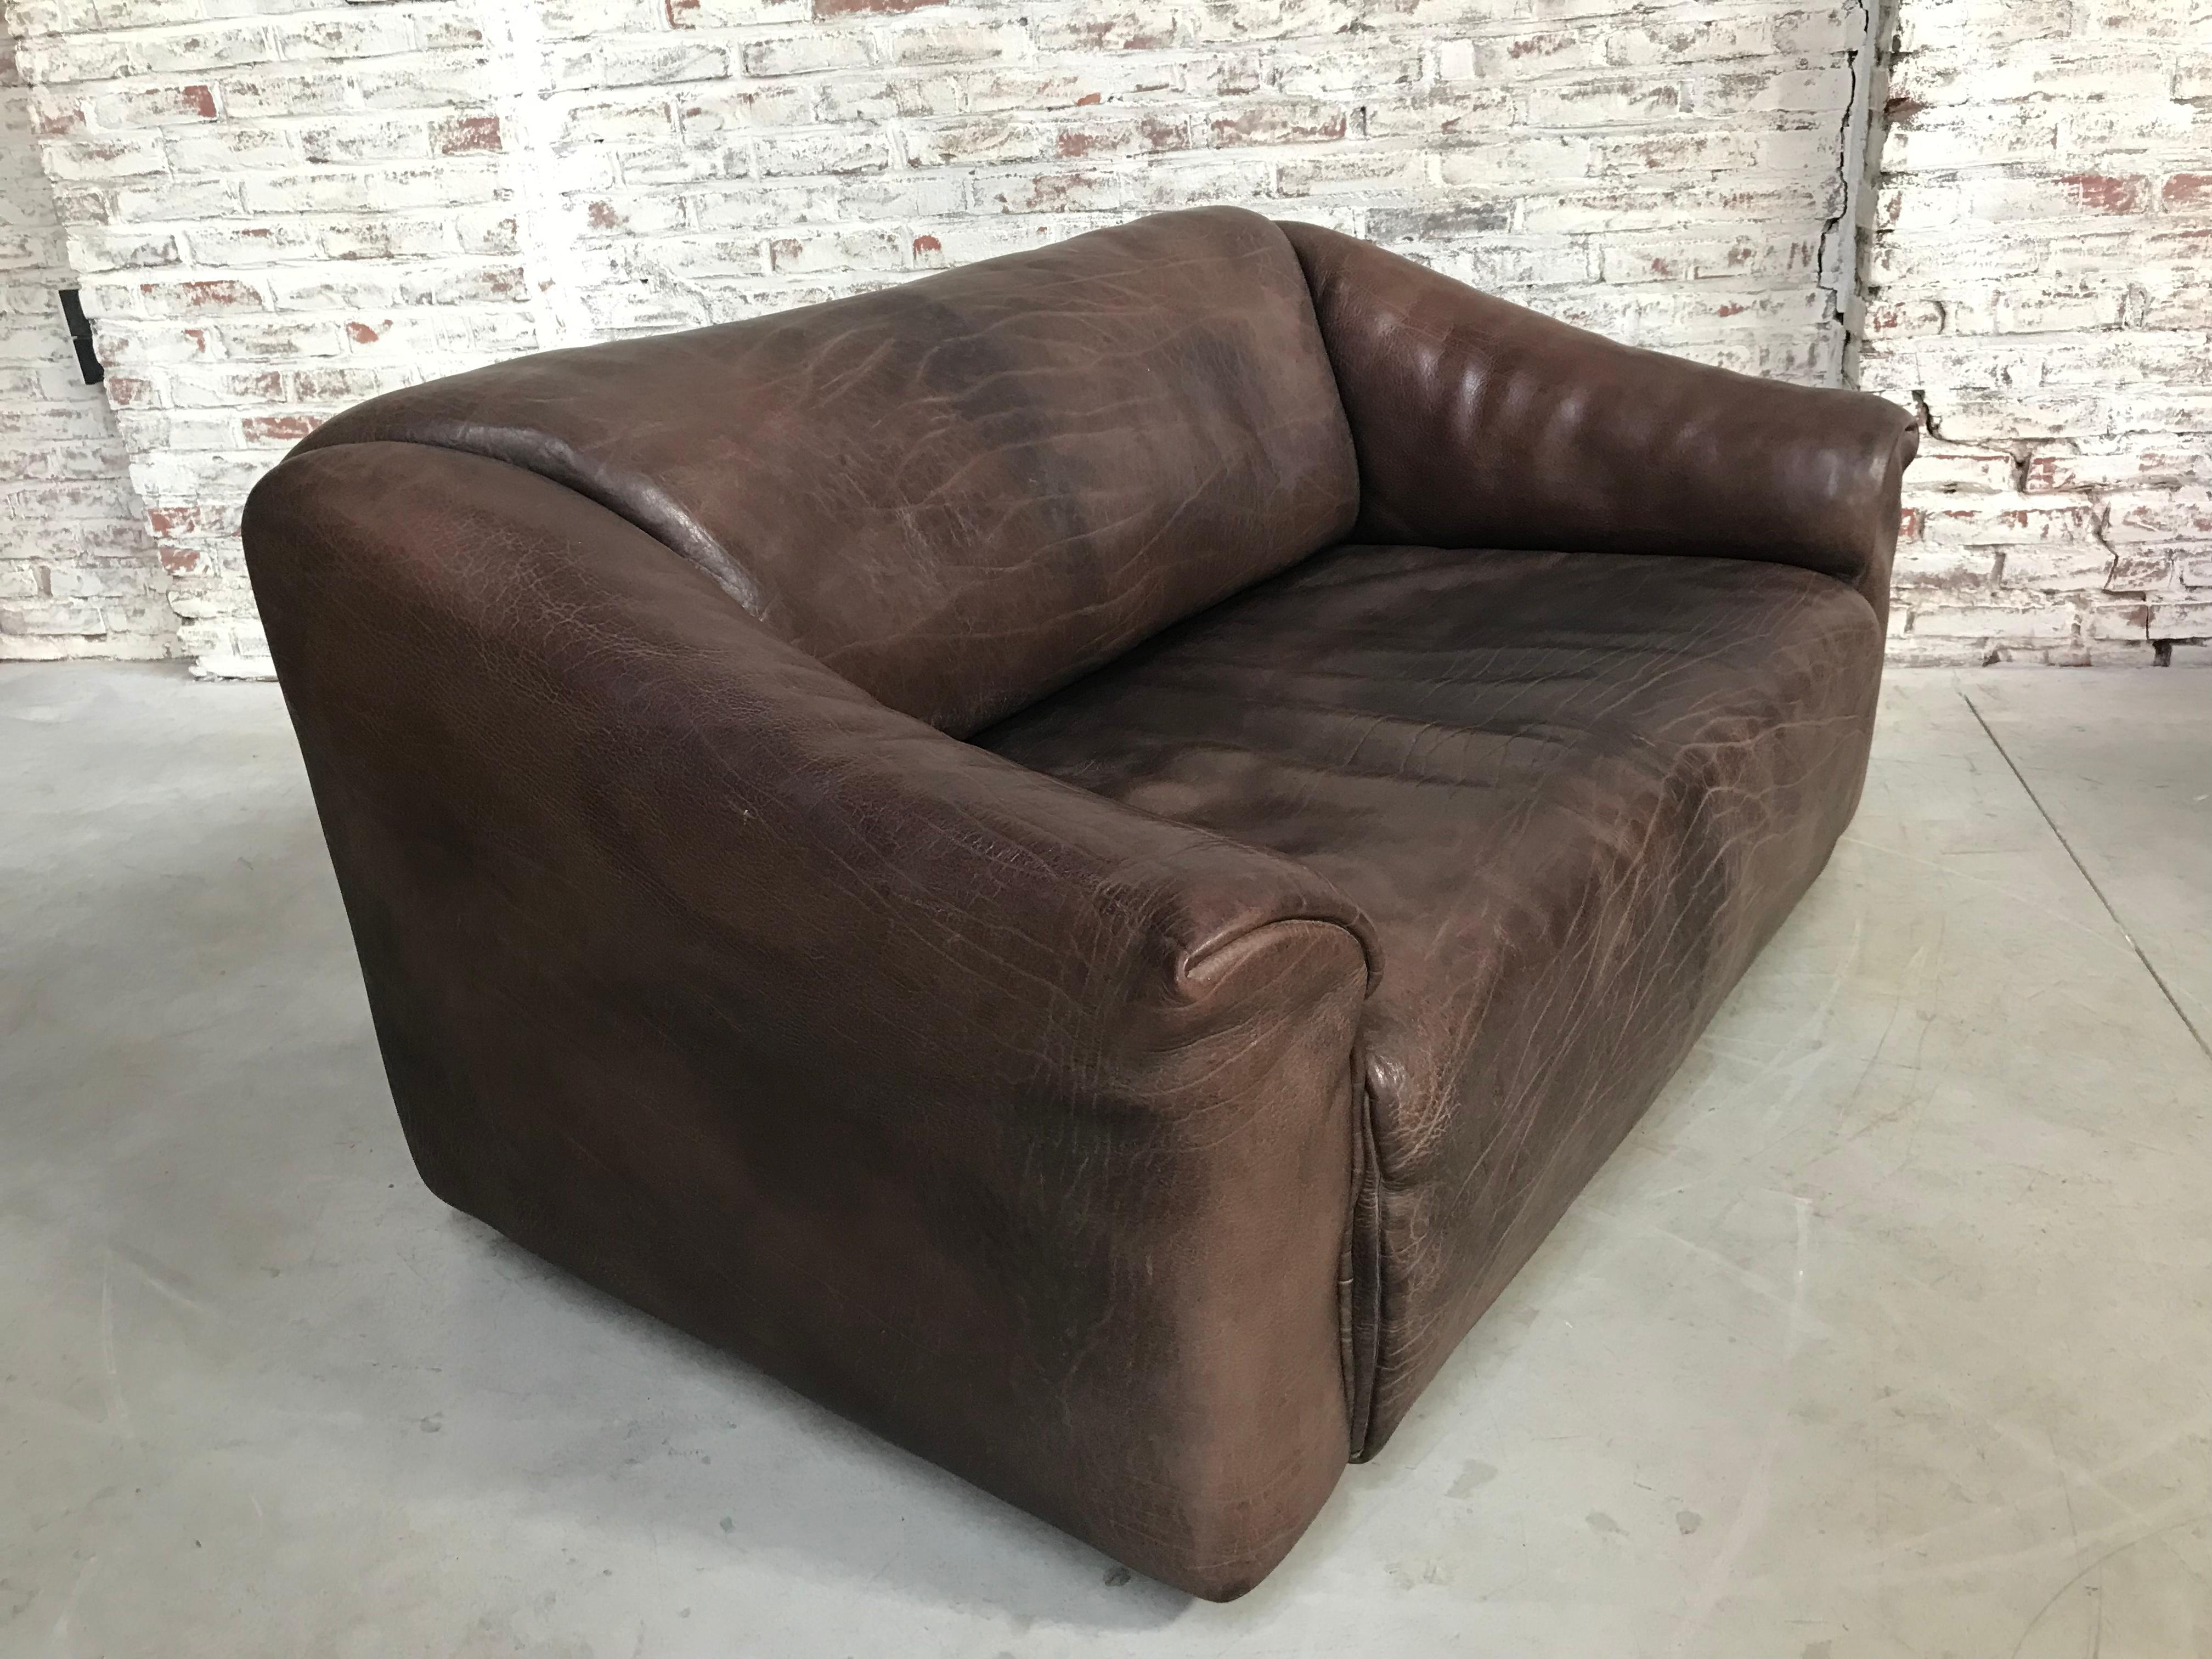 Midcentury Swiss De Sede Ds-47 Two-Seat in Chocolat Neck Leather, 1970s In Good Condition For Sale In Eindhoven, Netherlands